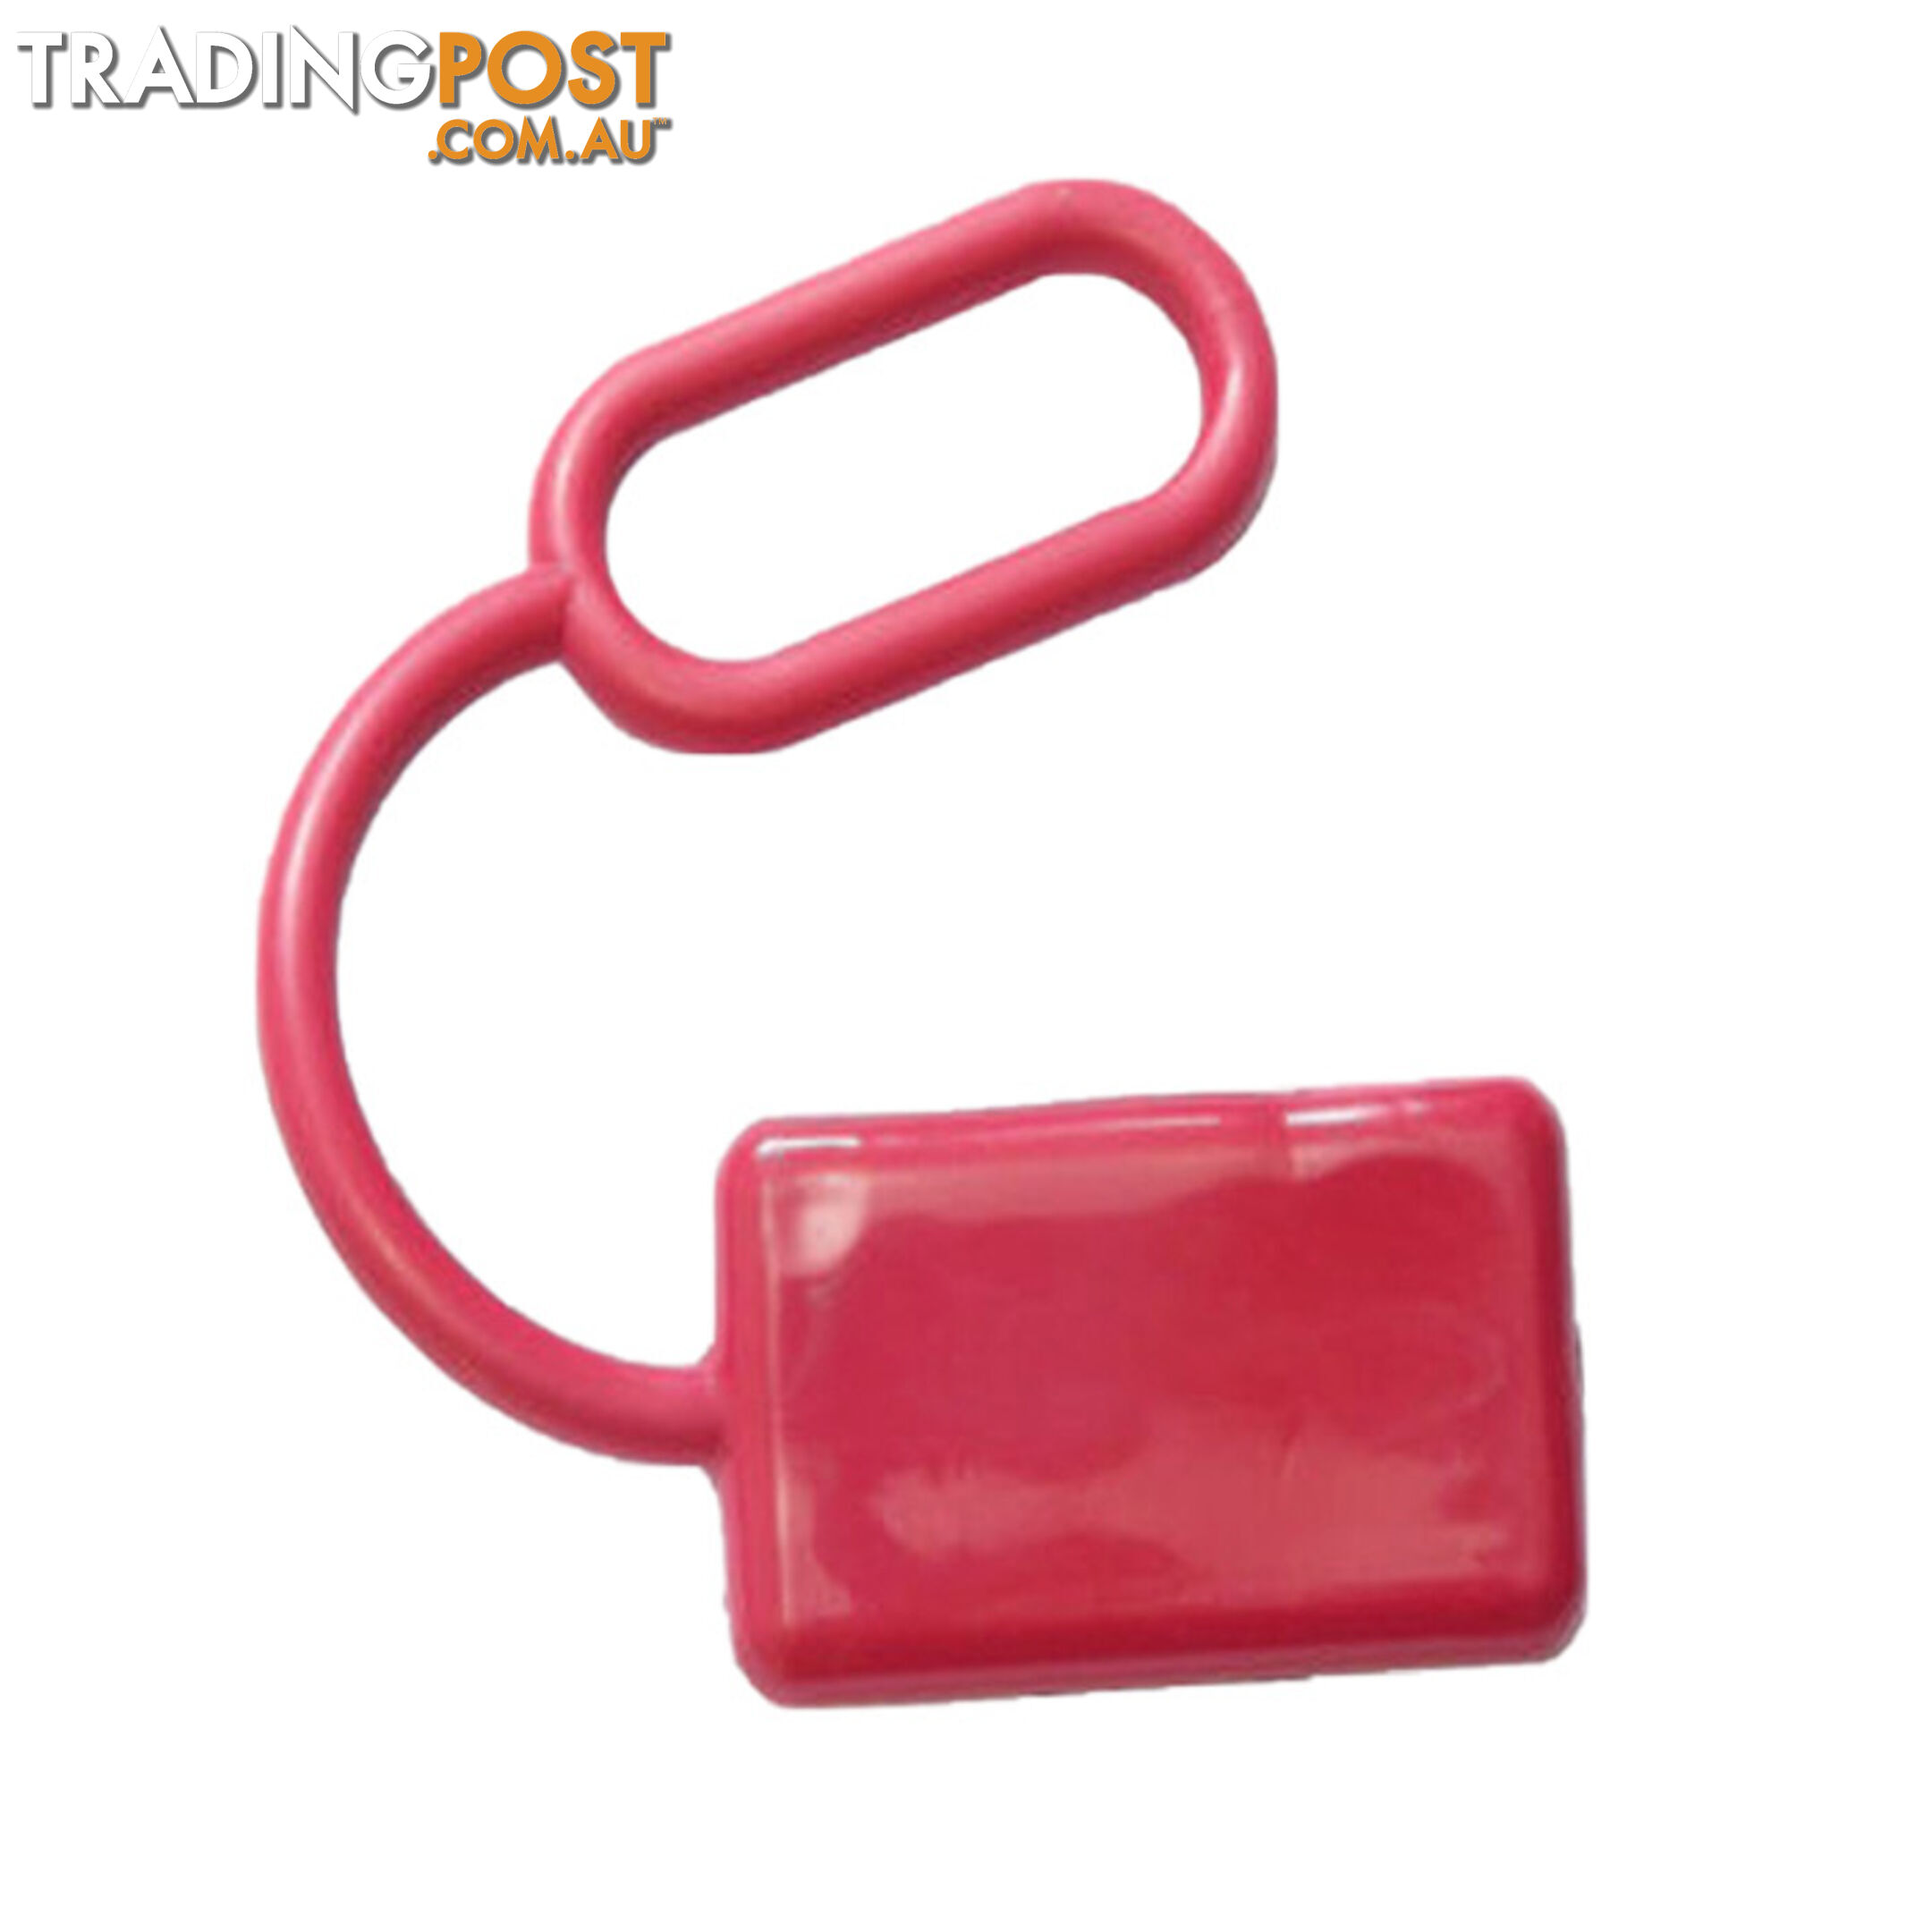 Dust Cap Red x 10 to Suit 175 Amp Anderson Plug SKU - YJ-AND175capx10